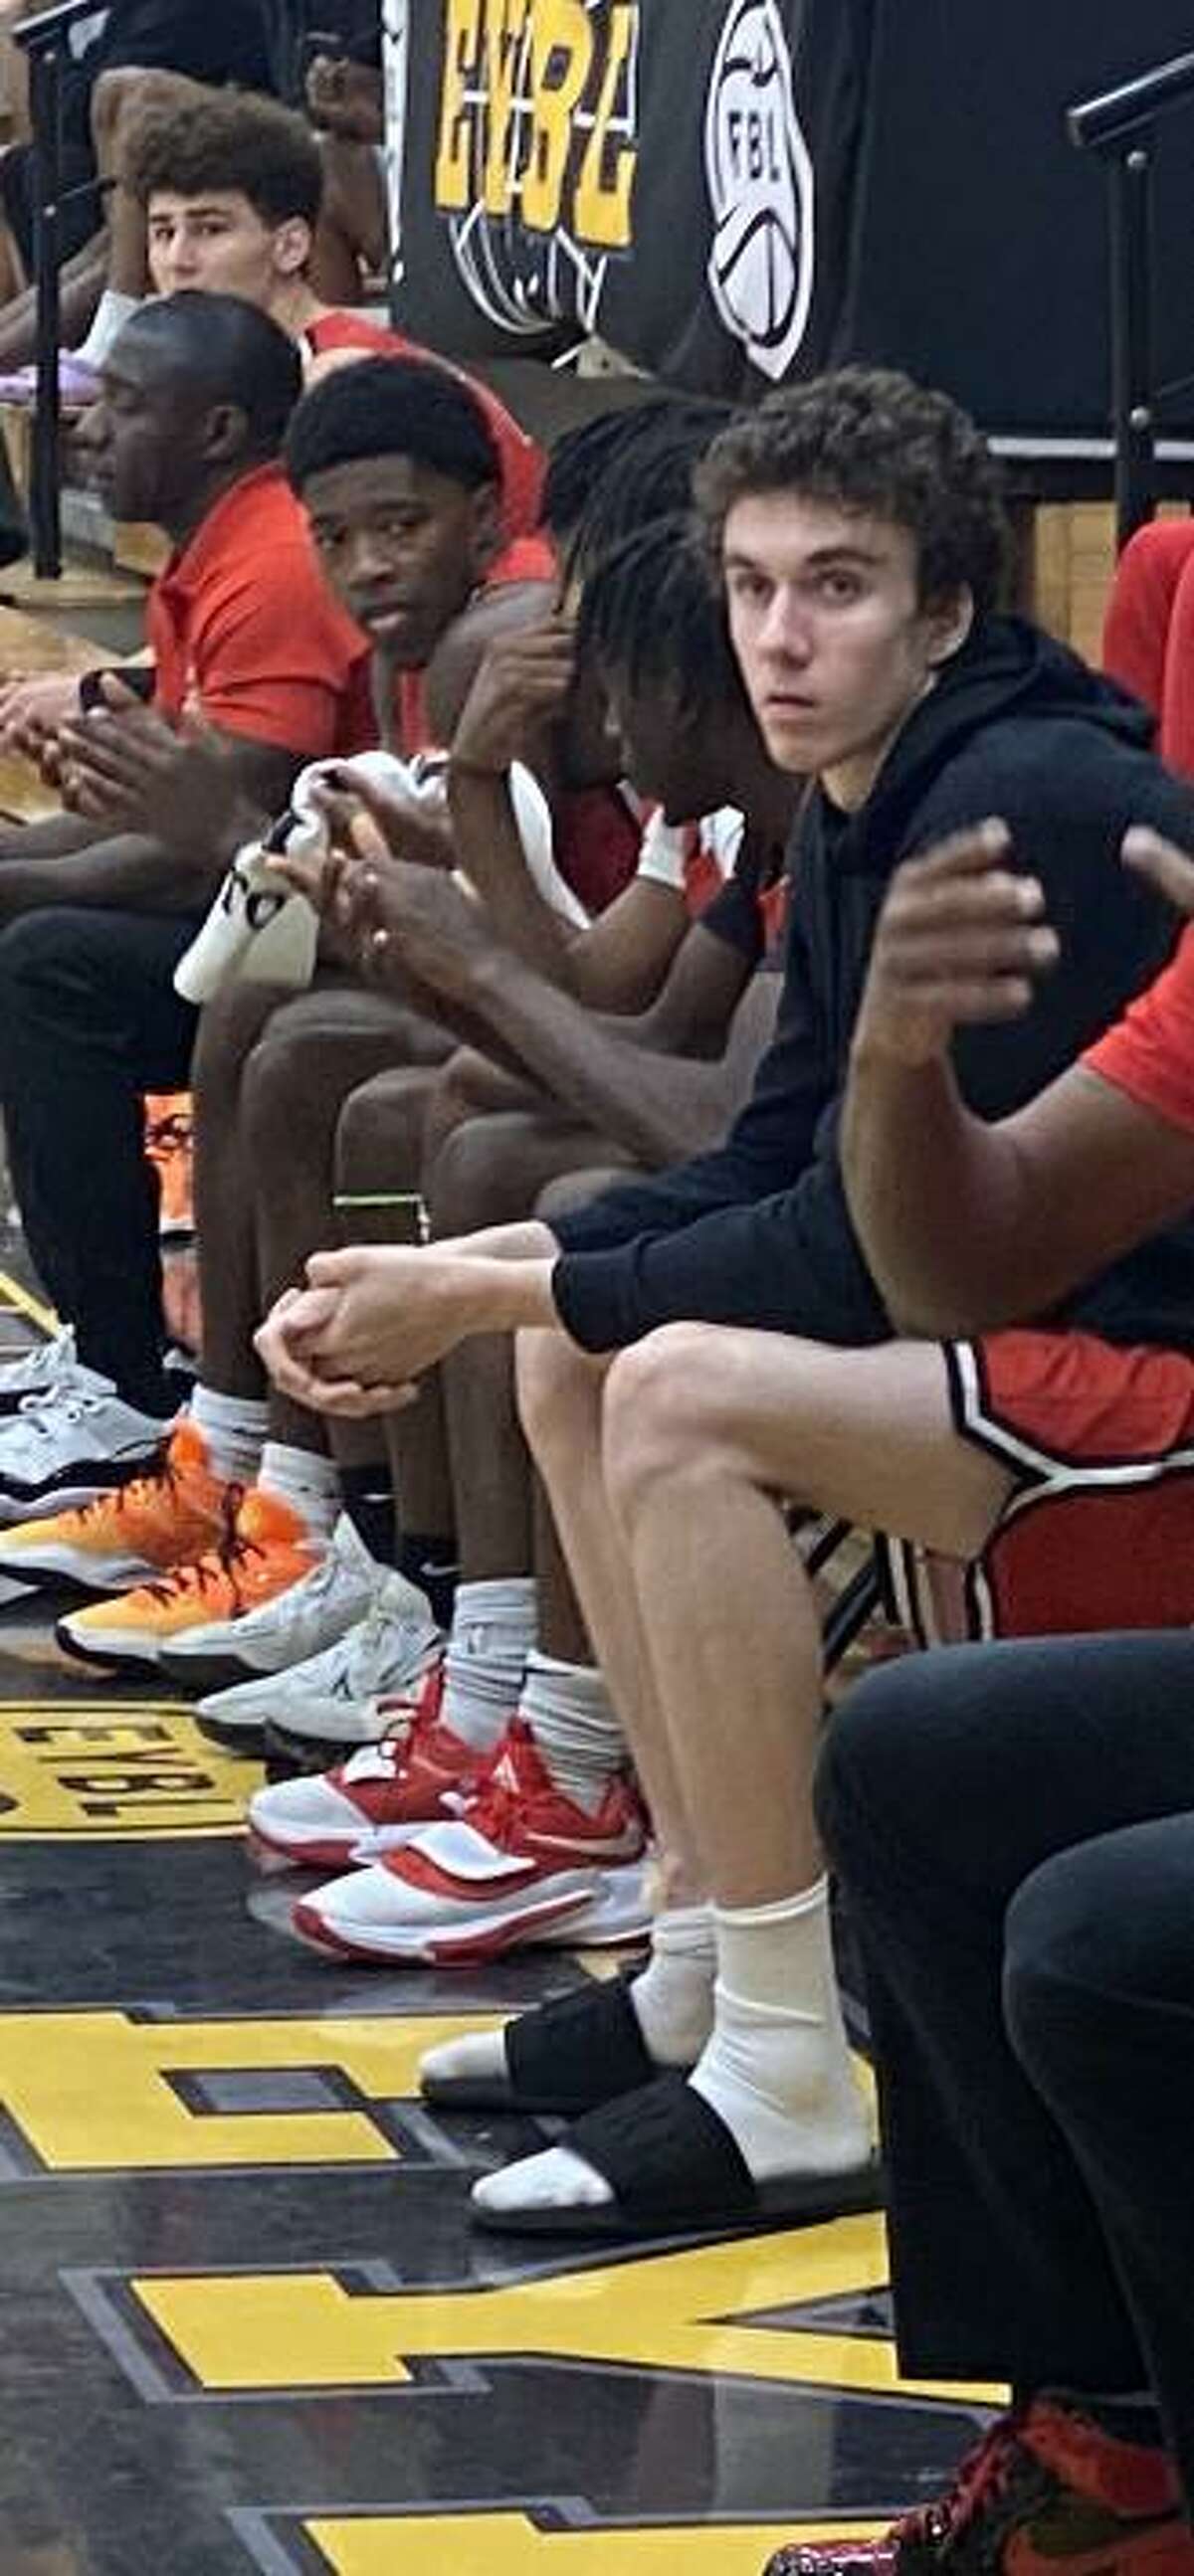 Simsbury's Gavin Griffiths (right) watches from the bench during Expression Elite's Peach Jam game on Tuesday. Griffiths, who has committed to Rutgers, sprained his ankle on Monday but hopes to return to the floor on Wednesday.